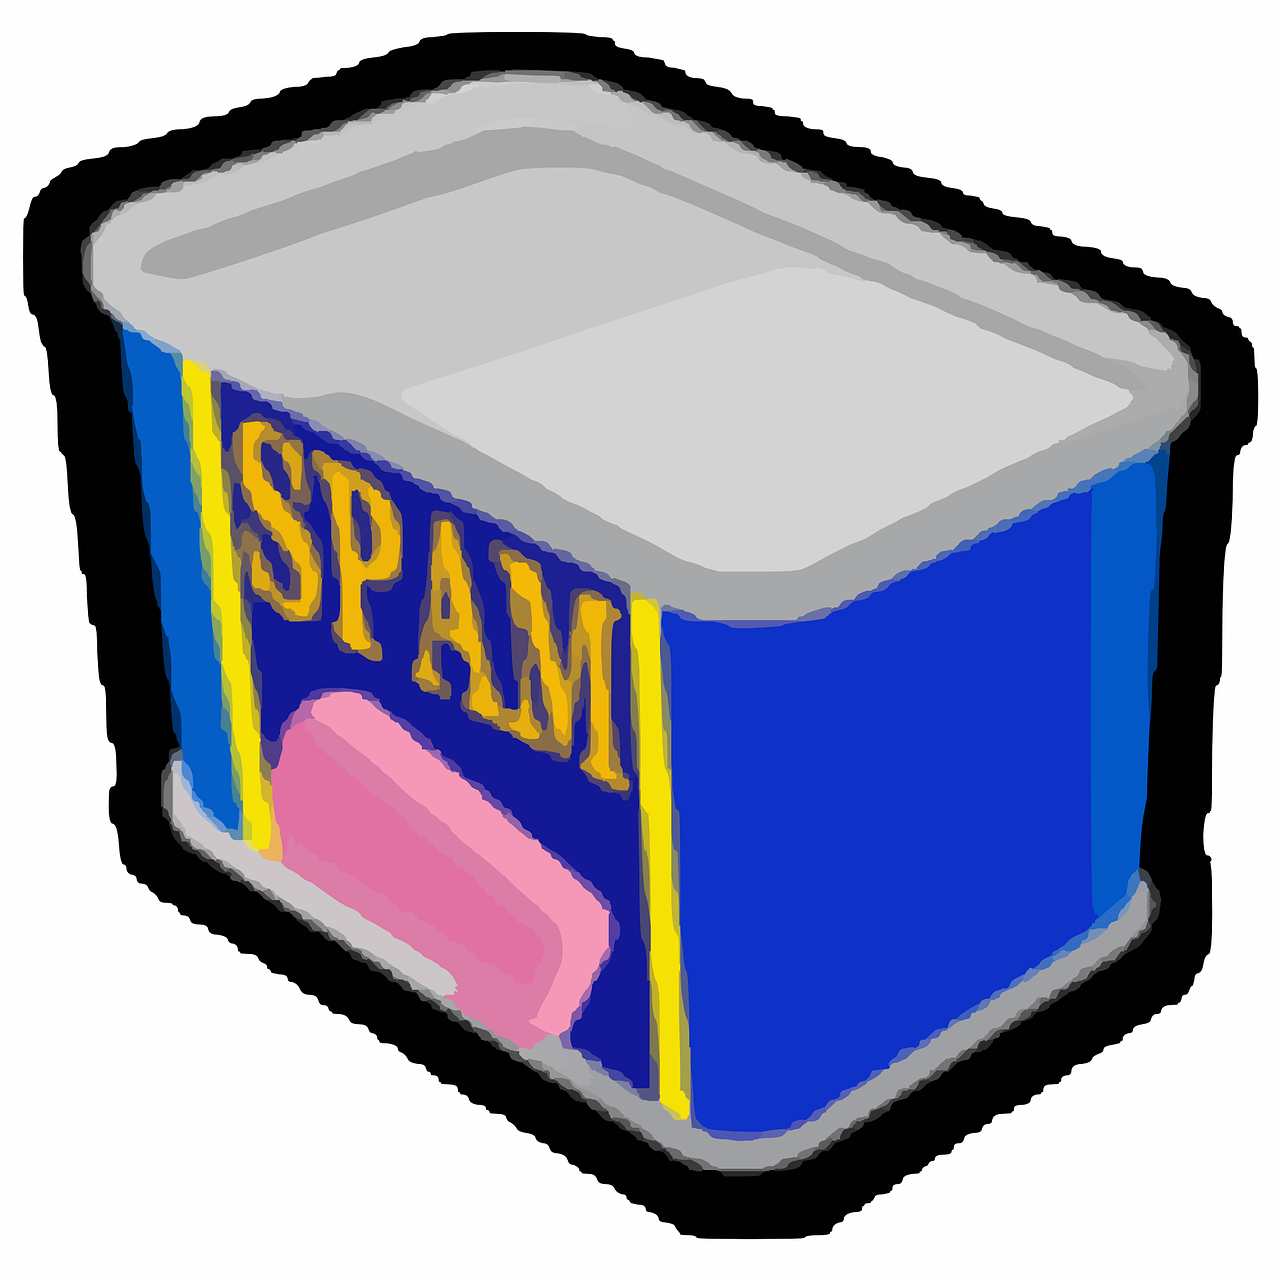 can spam tin can free photo